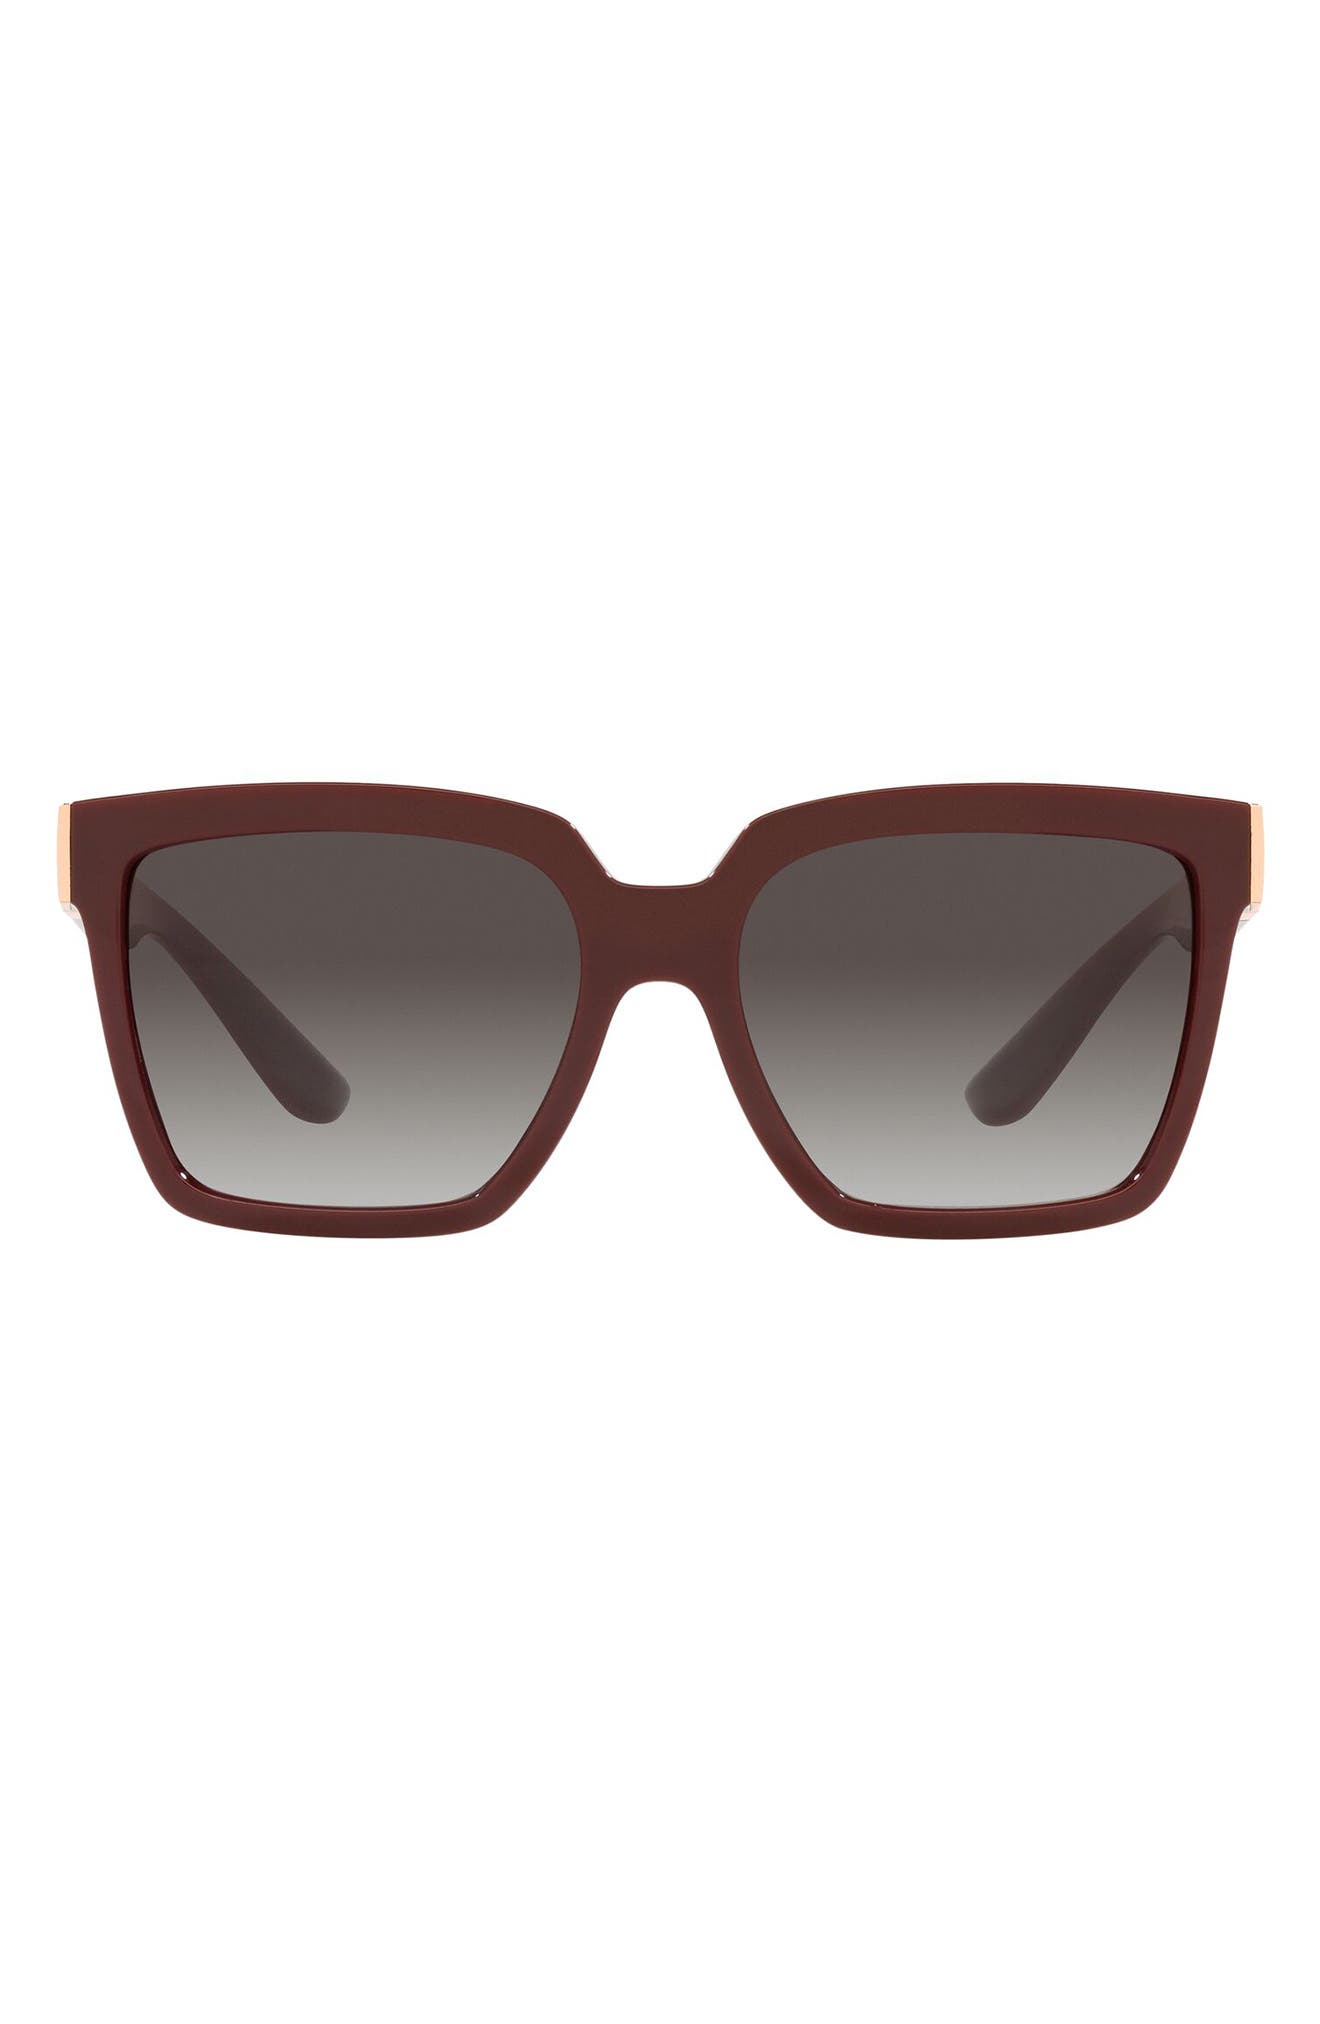 Dolce & Gabbana 56mm Square Sunglasses in Bordeaux at Nordstrom